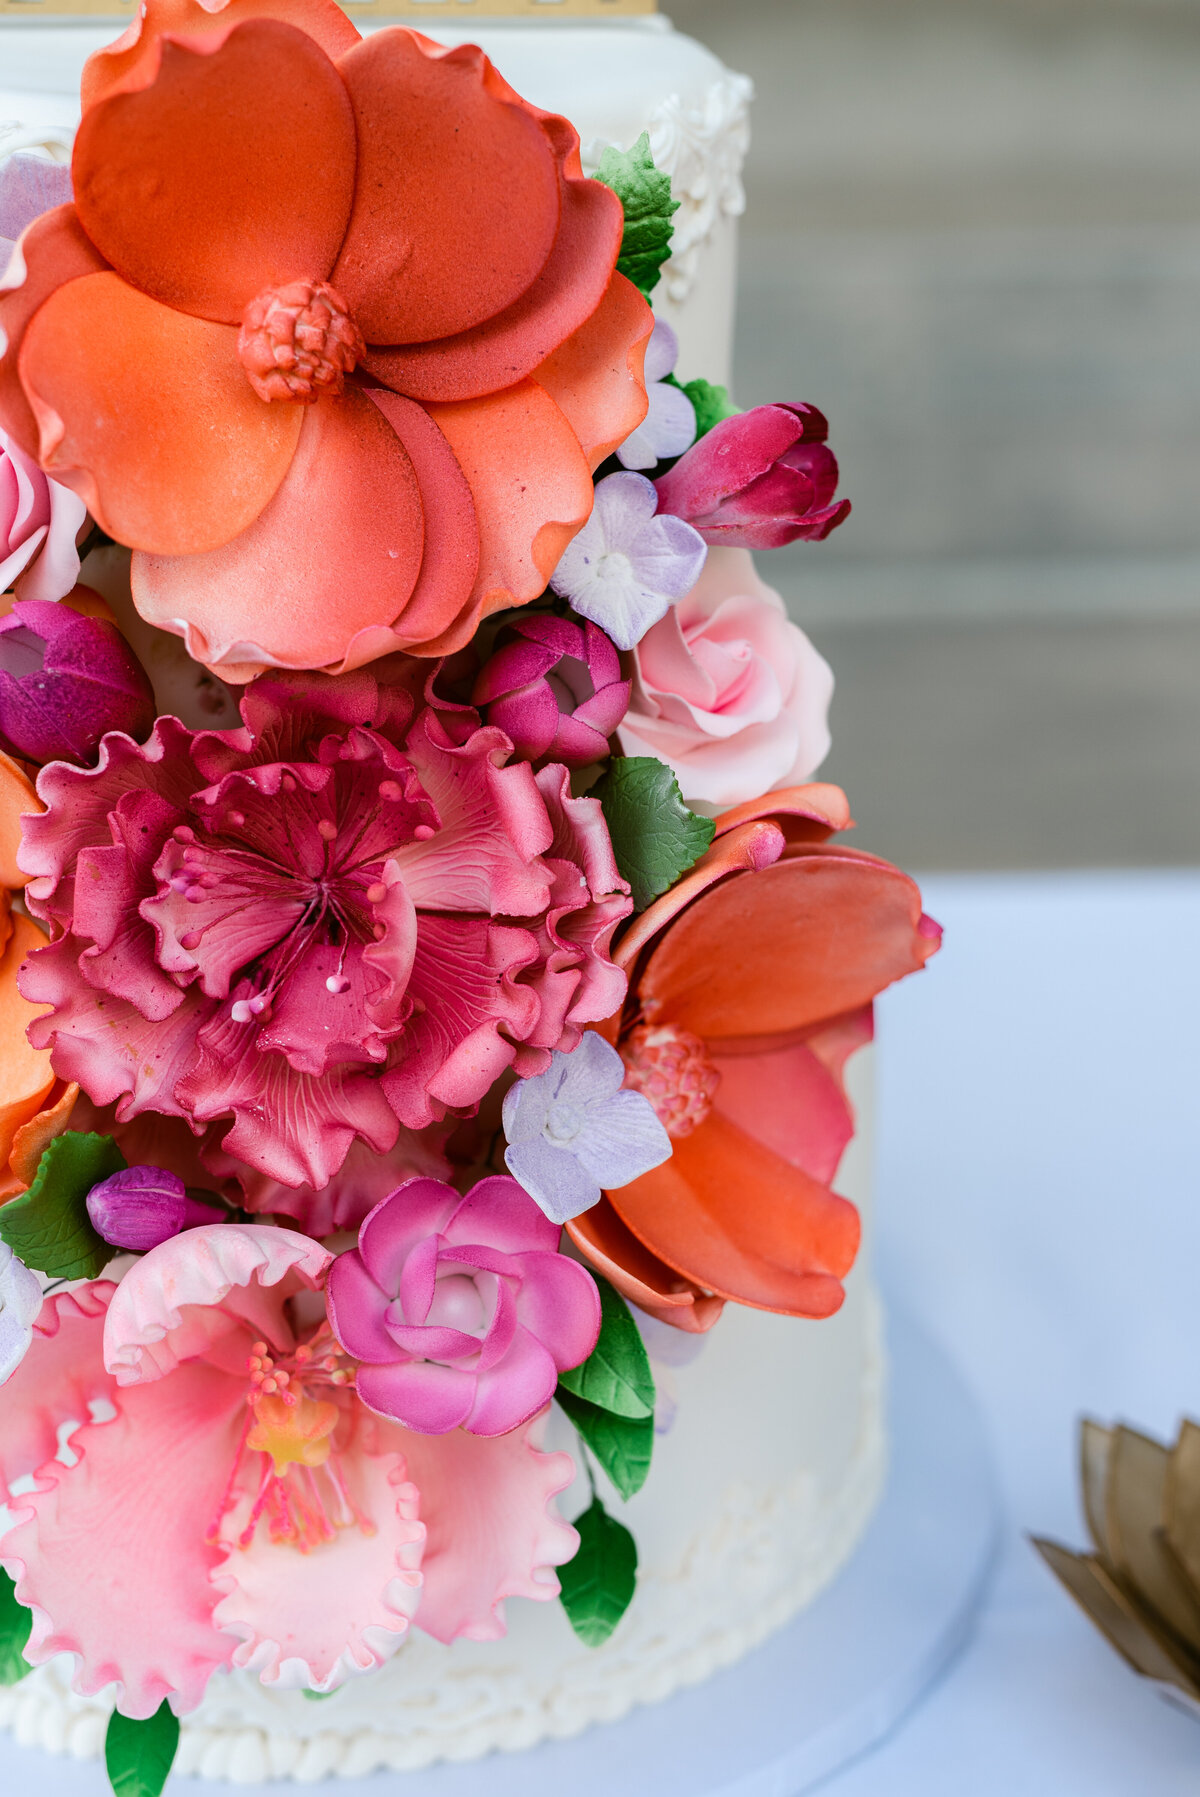 Real icing flowers on this orange and pink summer wedding cake.